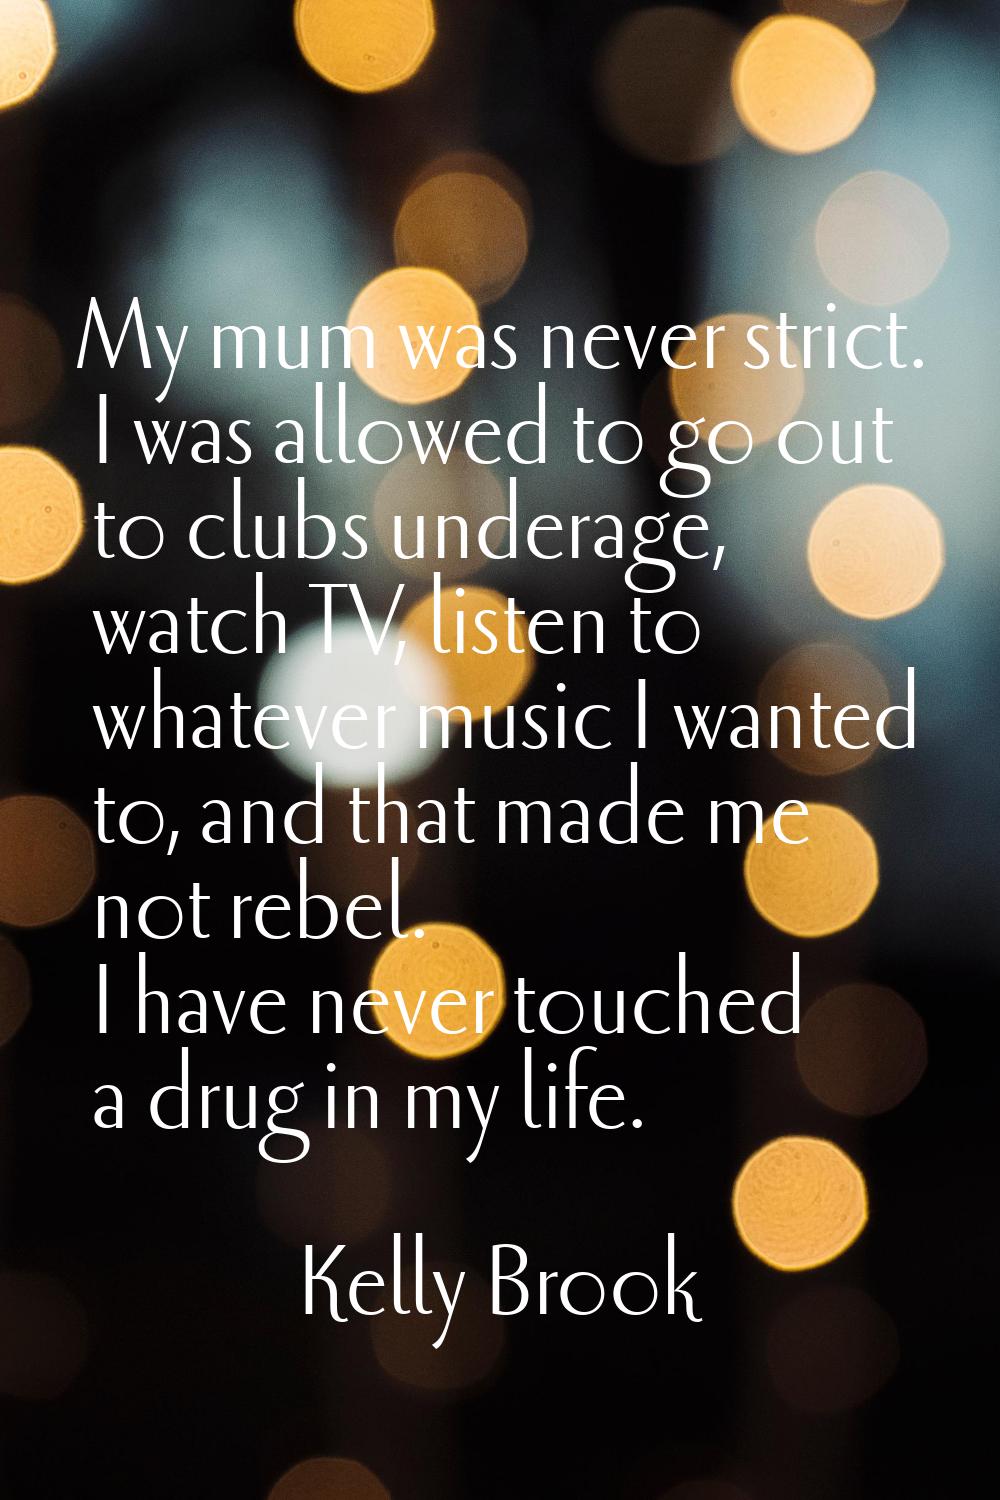 My mum was never strict. I was allowed to go out to clubs underage, watch TV, listen to whatever mu